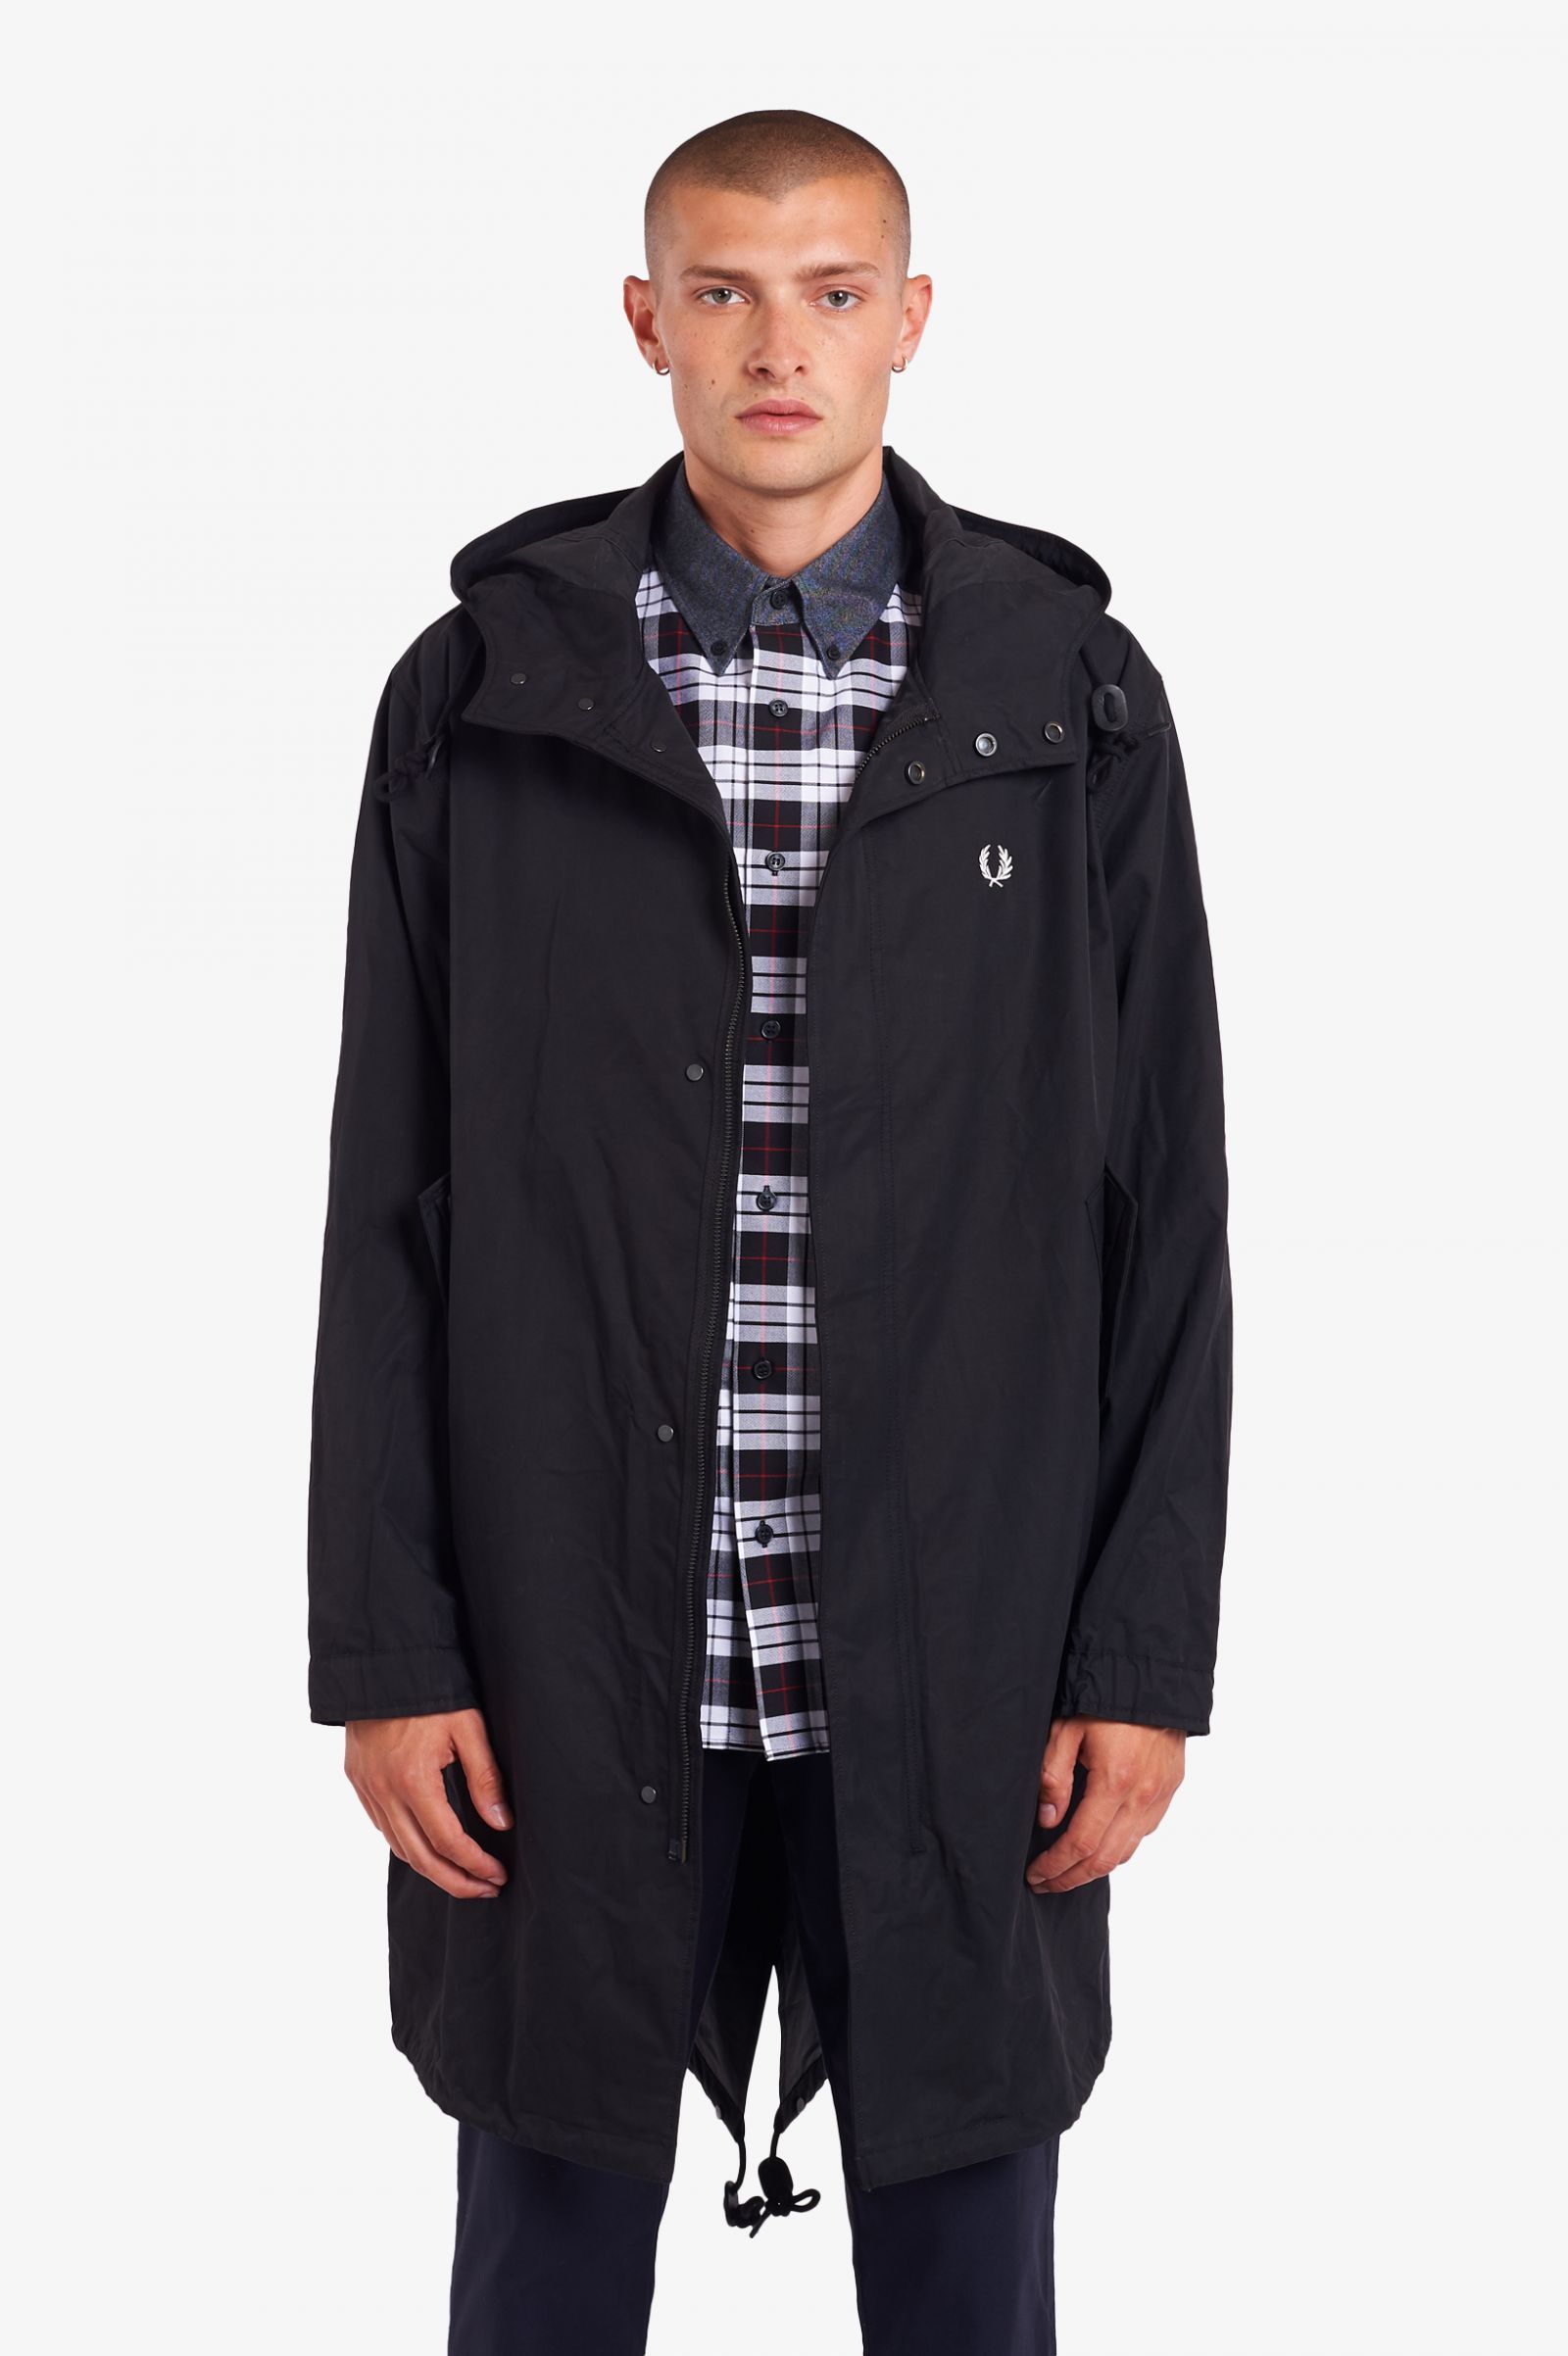 Fred Perry Parka Black Flash Sales, SAVE 53%.